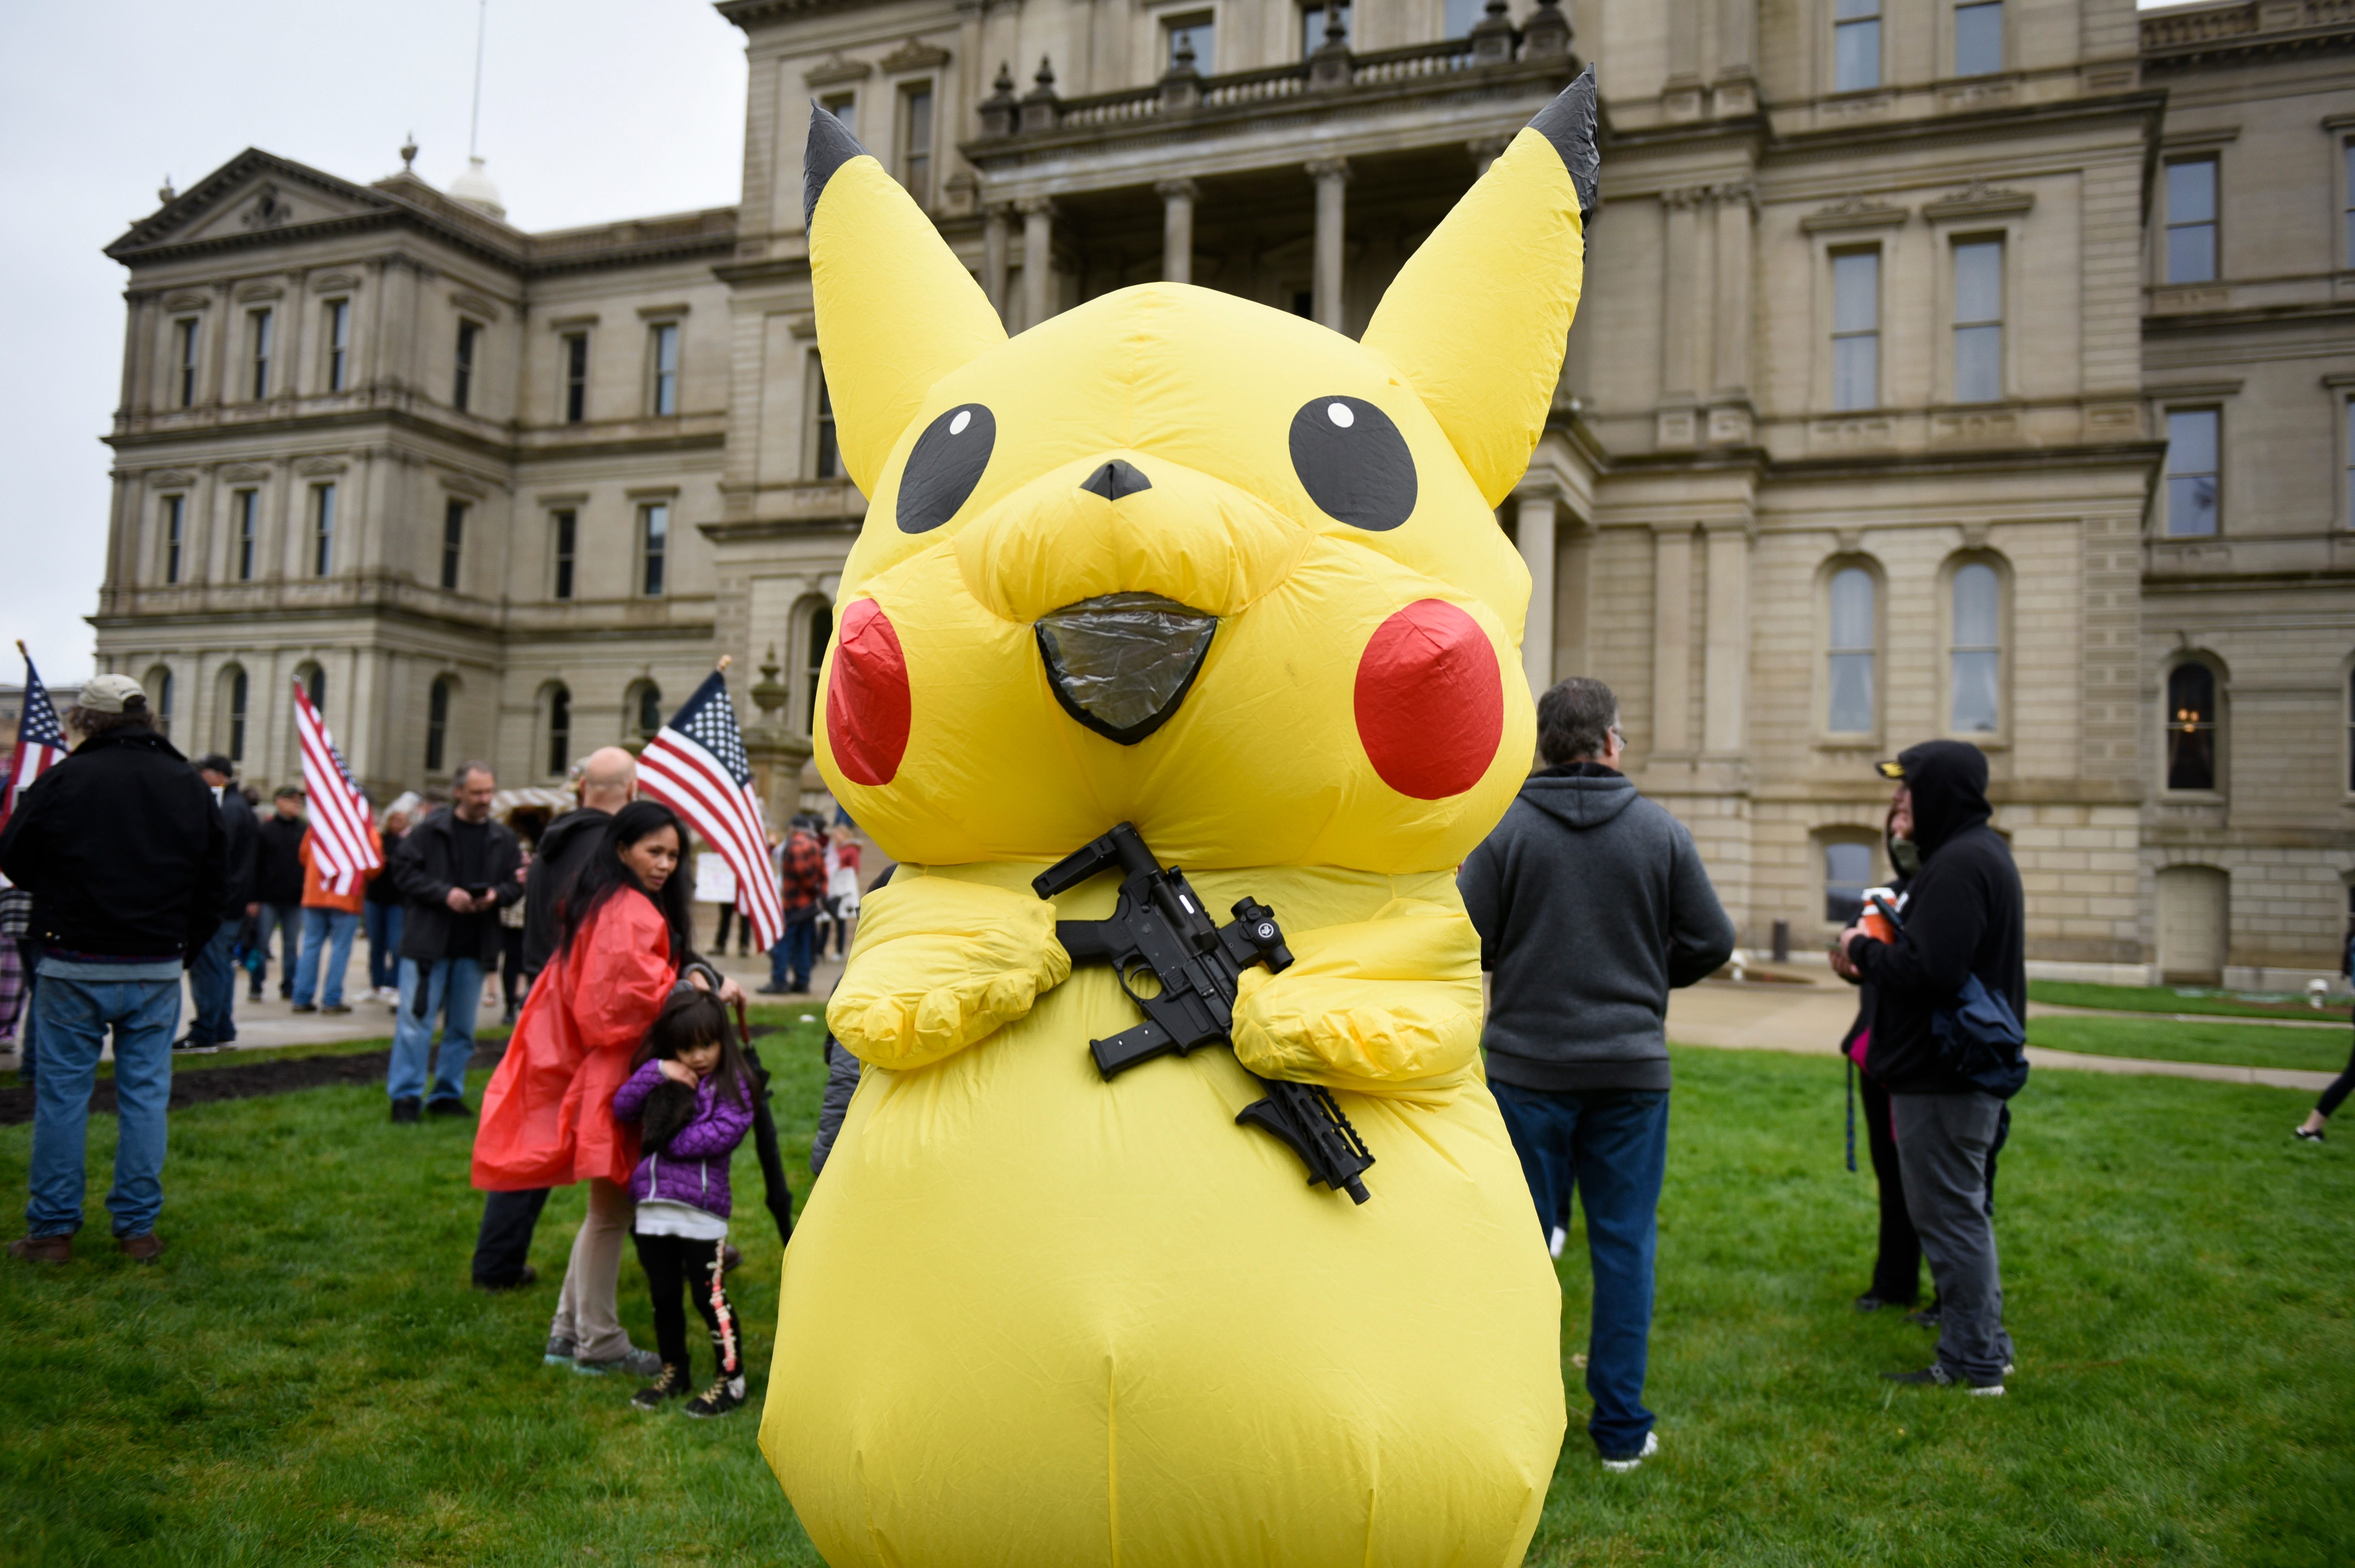 A large Pikachu holds an AR-9 assault-style gun during a protest at the state Capitol to oppose the executive orders Gov. Gretchen Whitmer issued in response to the coronavirus pandemic, Thursday, May 14, 2020.